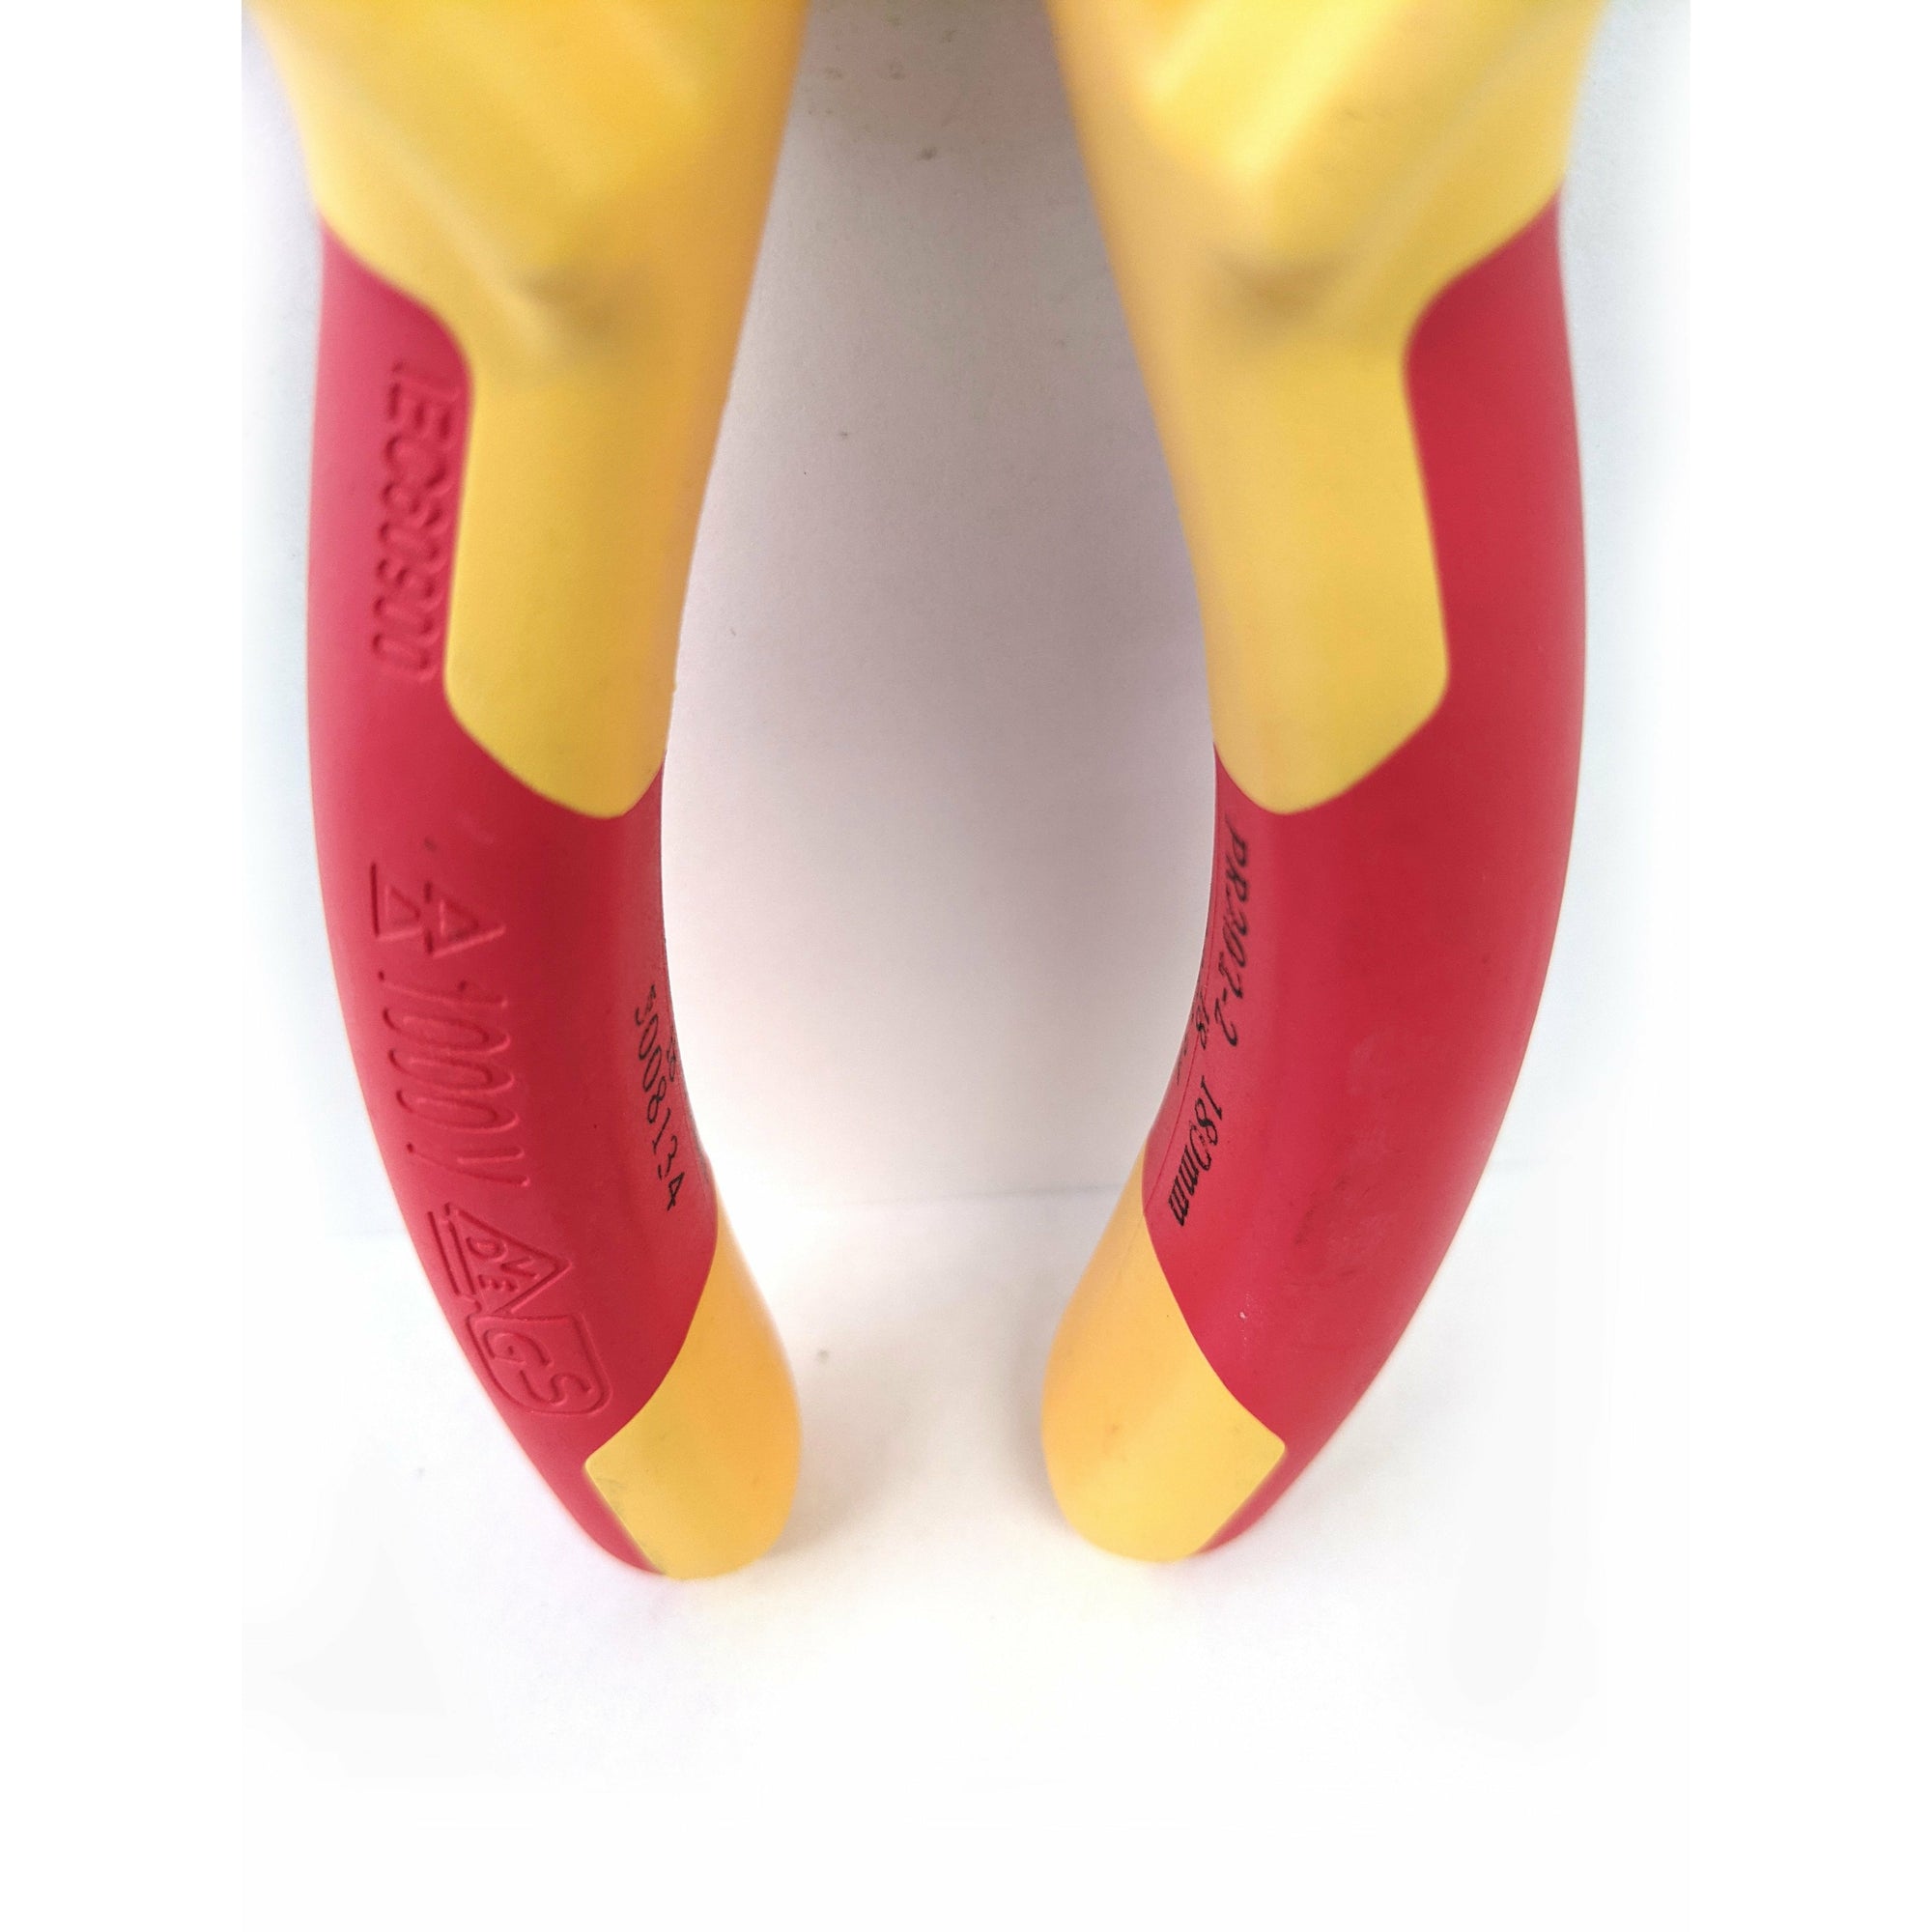 Workpro Vde Insulated Diagonal Pliers